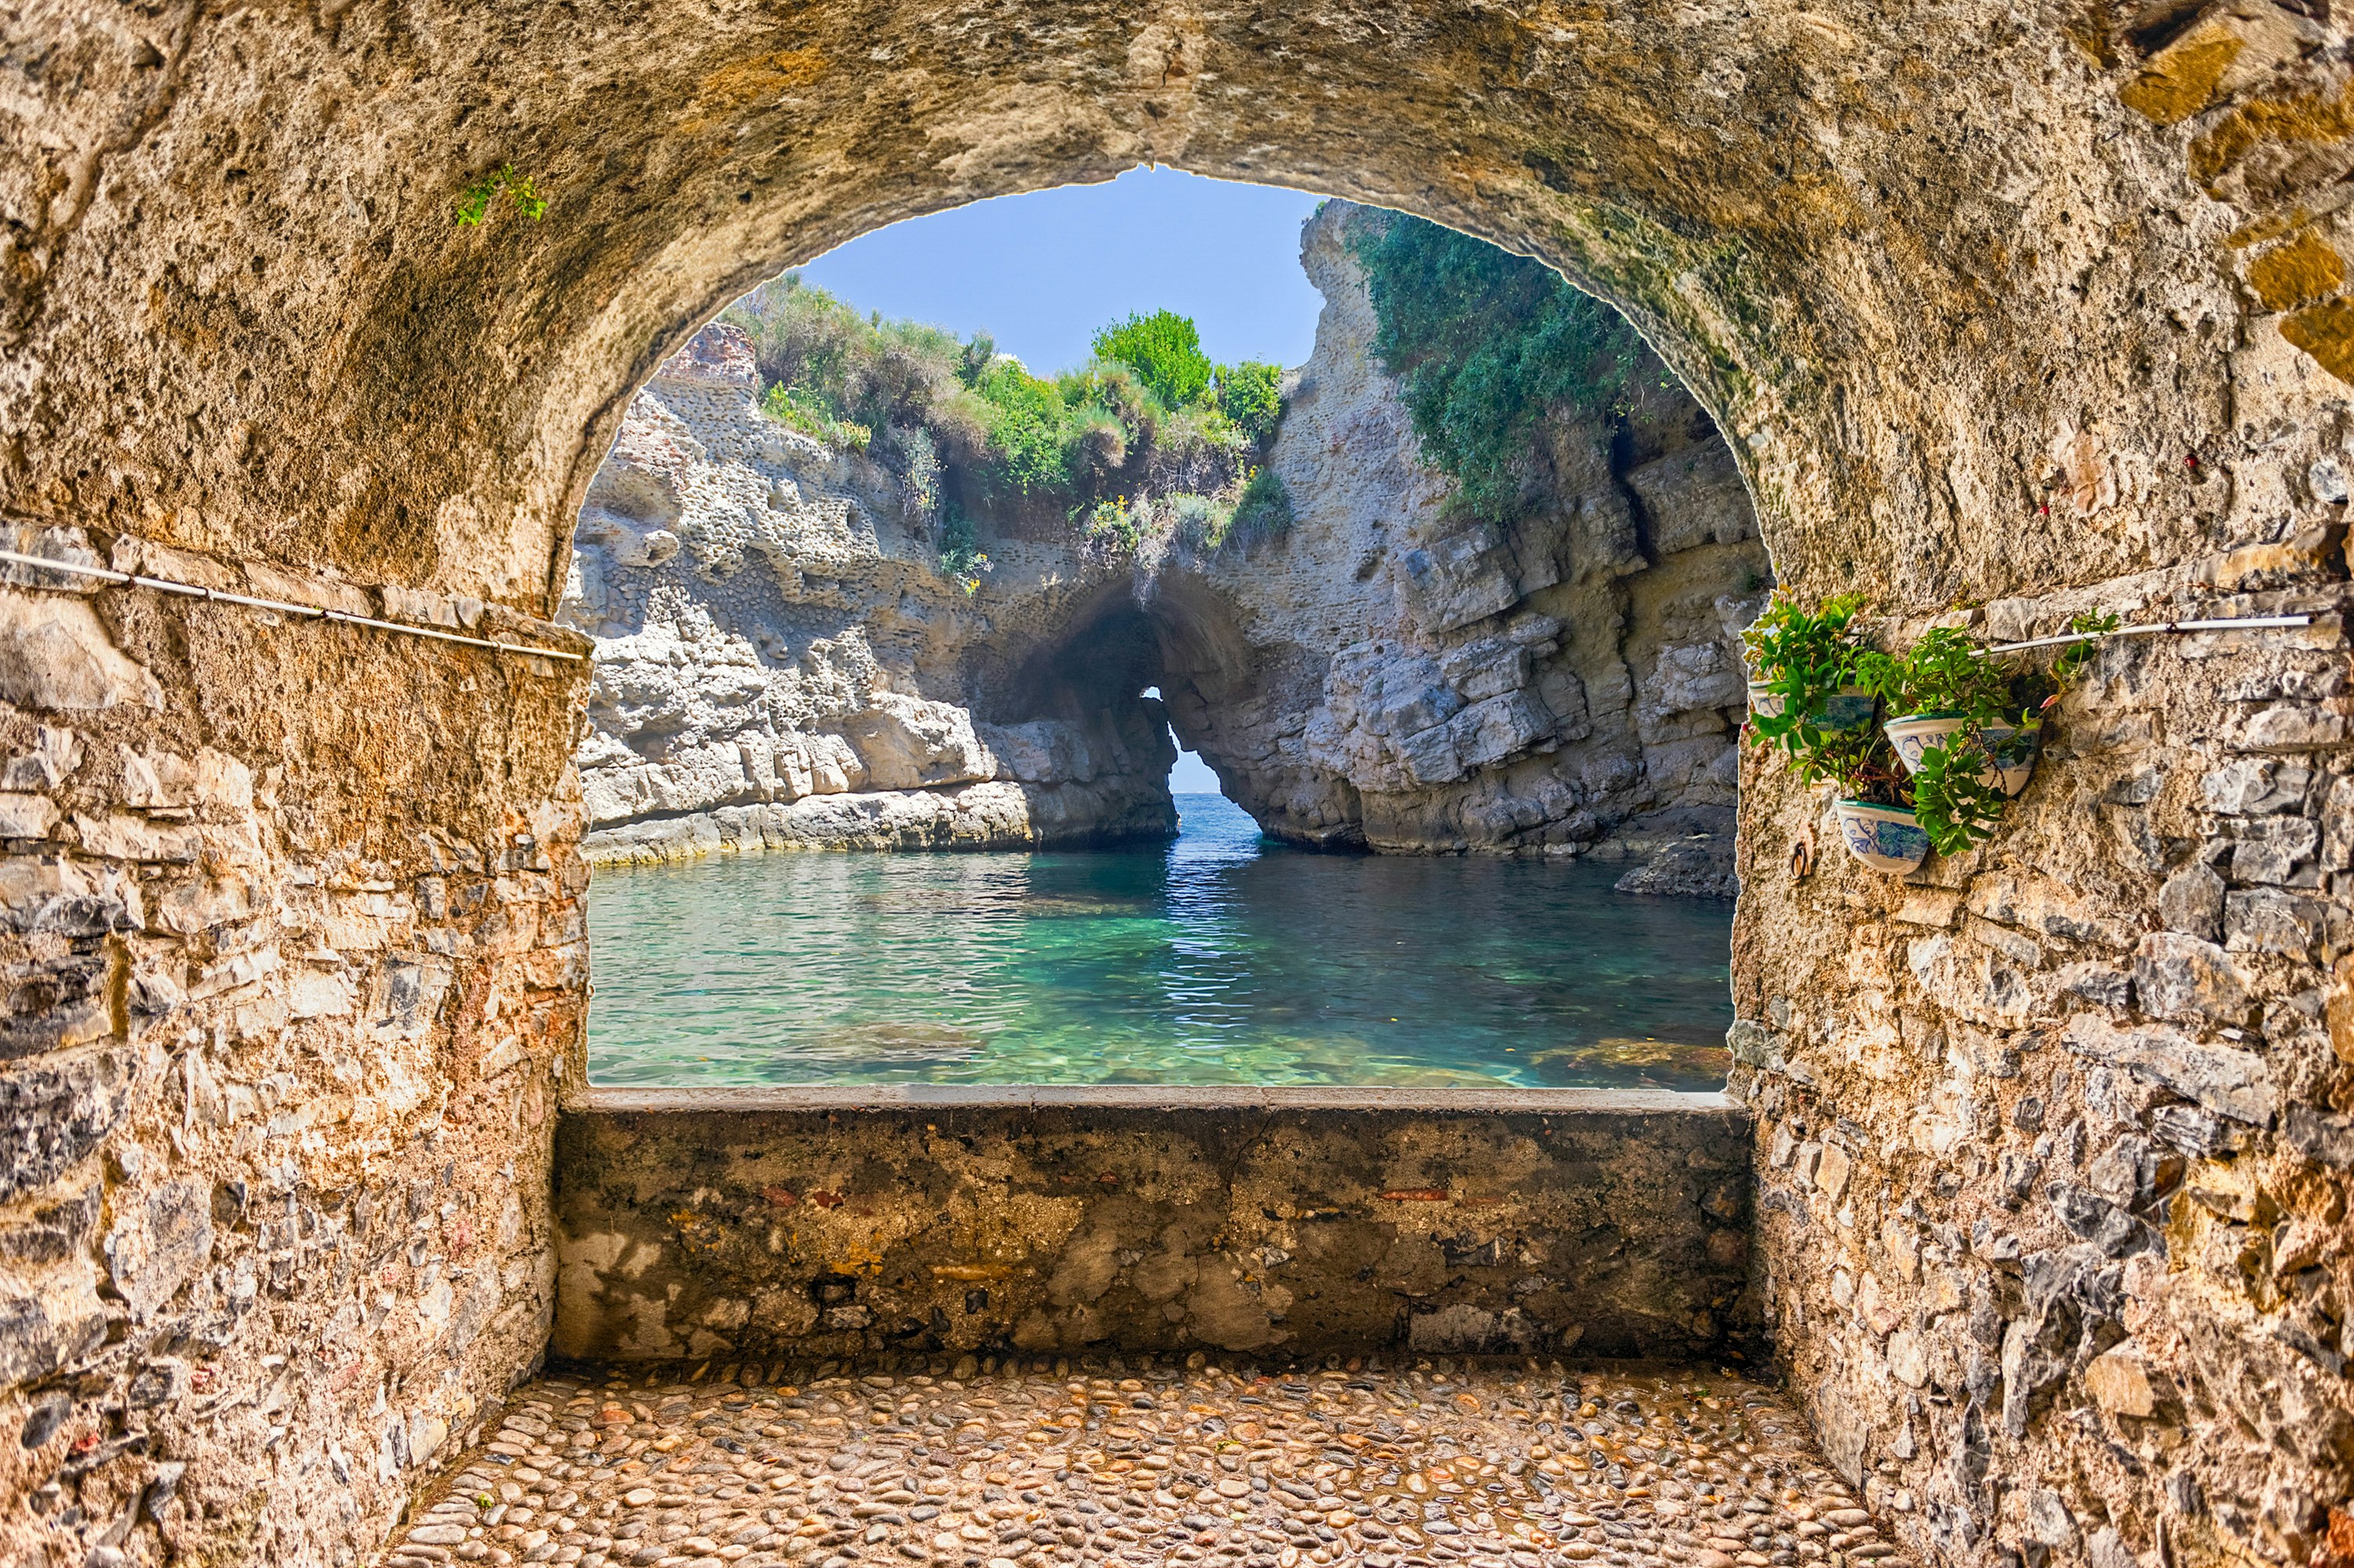 Rock balcony overlooking a natural pool in Sorrento, Naples, Italy